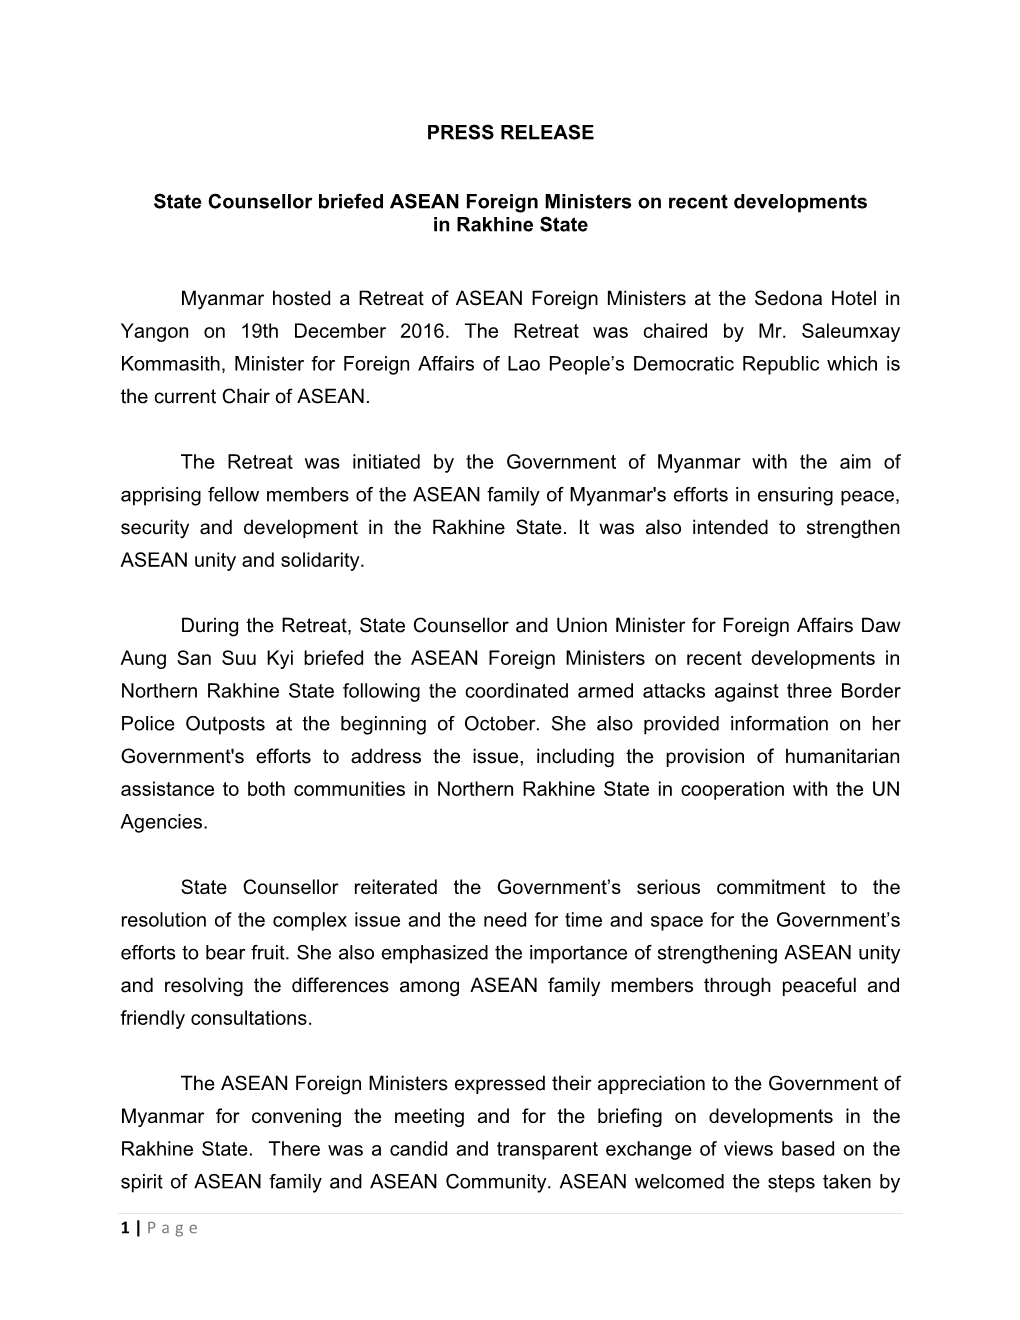 PRESS RELEASE State Counsellor Briefed ASEAN Foreign Ministers